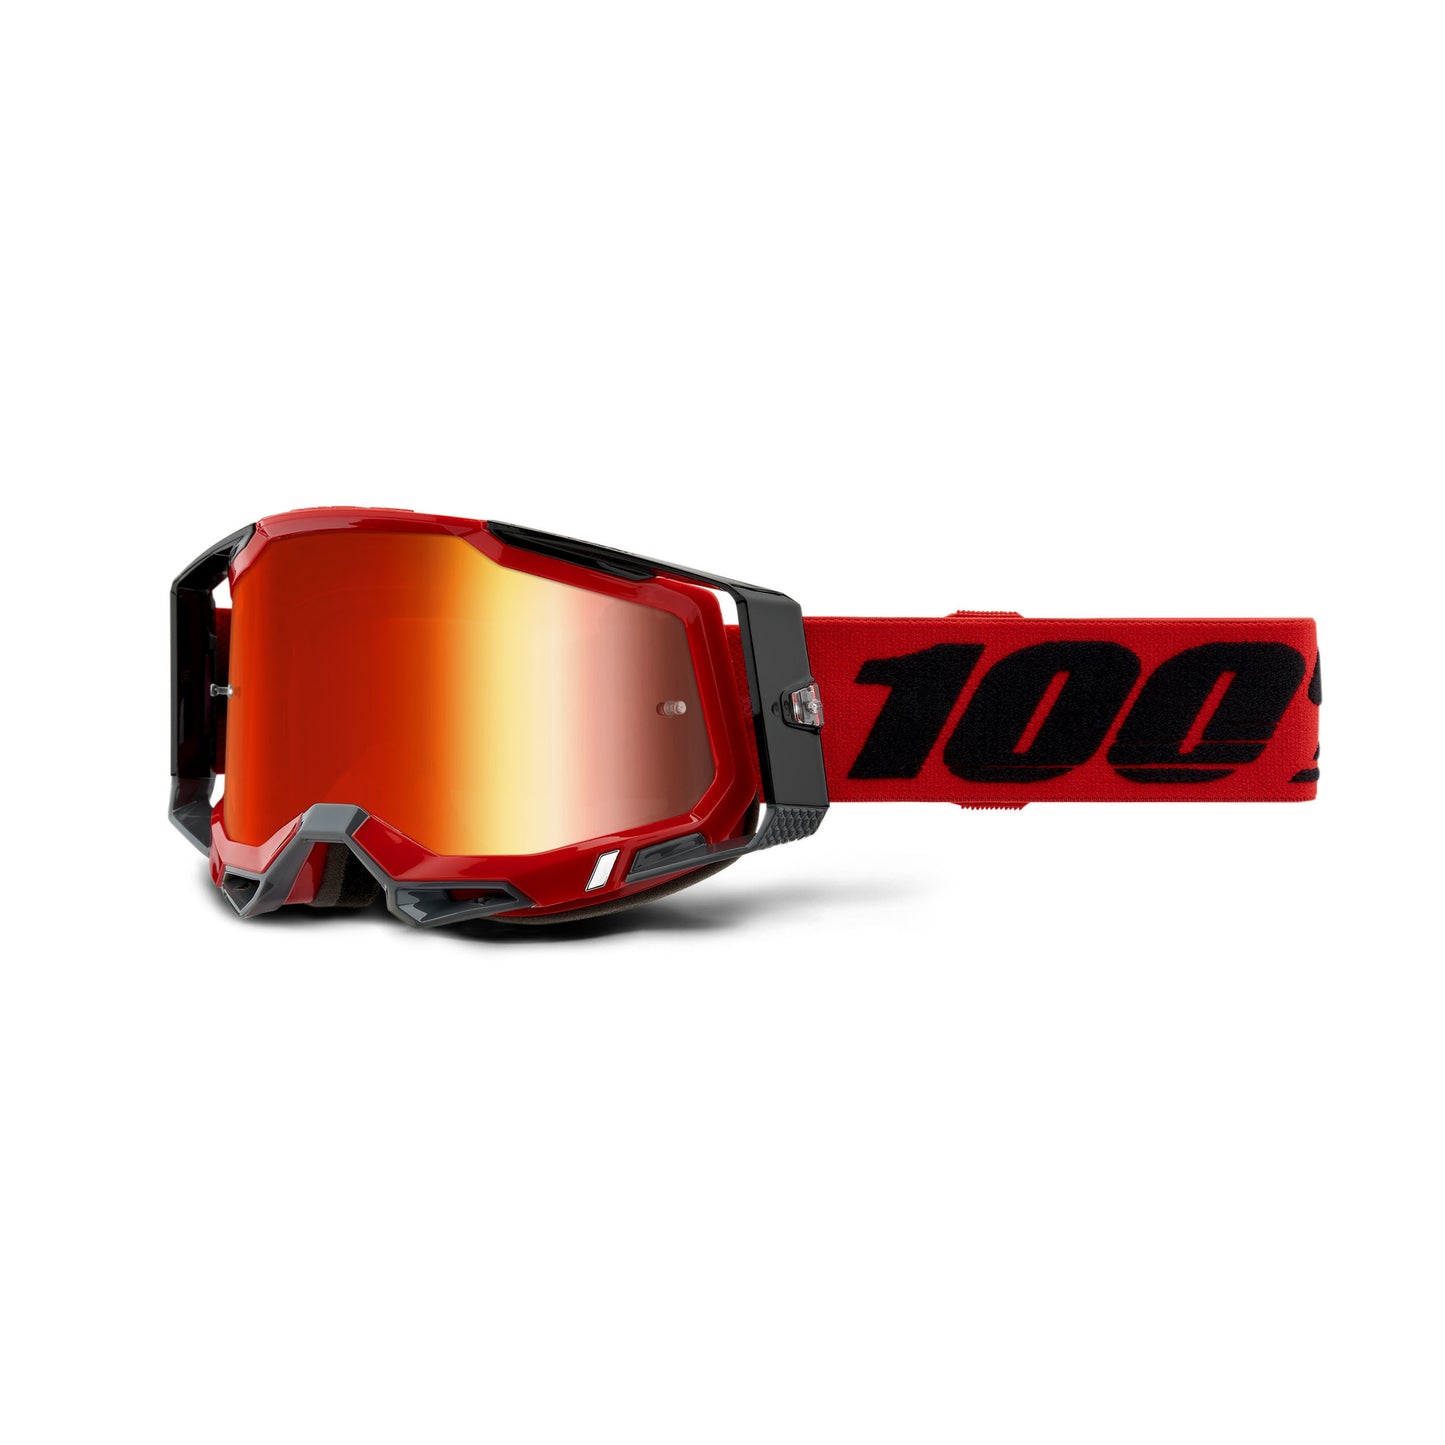 100 Percent Racecraft 2 Goggles - One Size Fits Most - Red - Red Mirror Lens